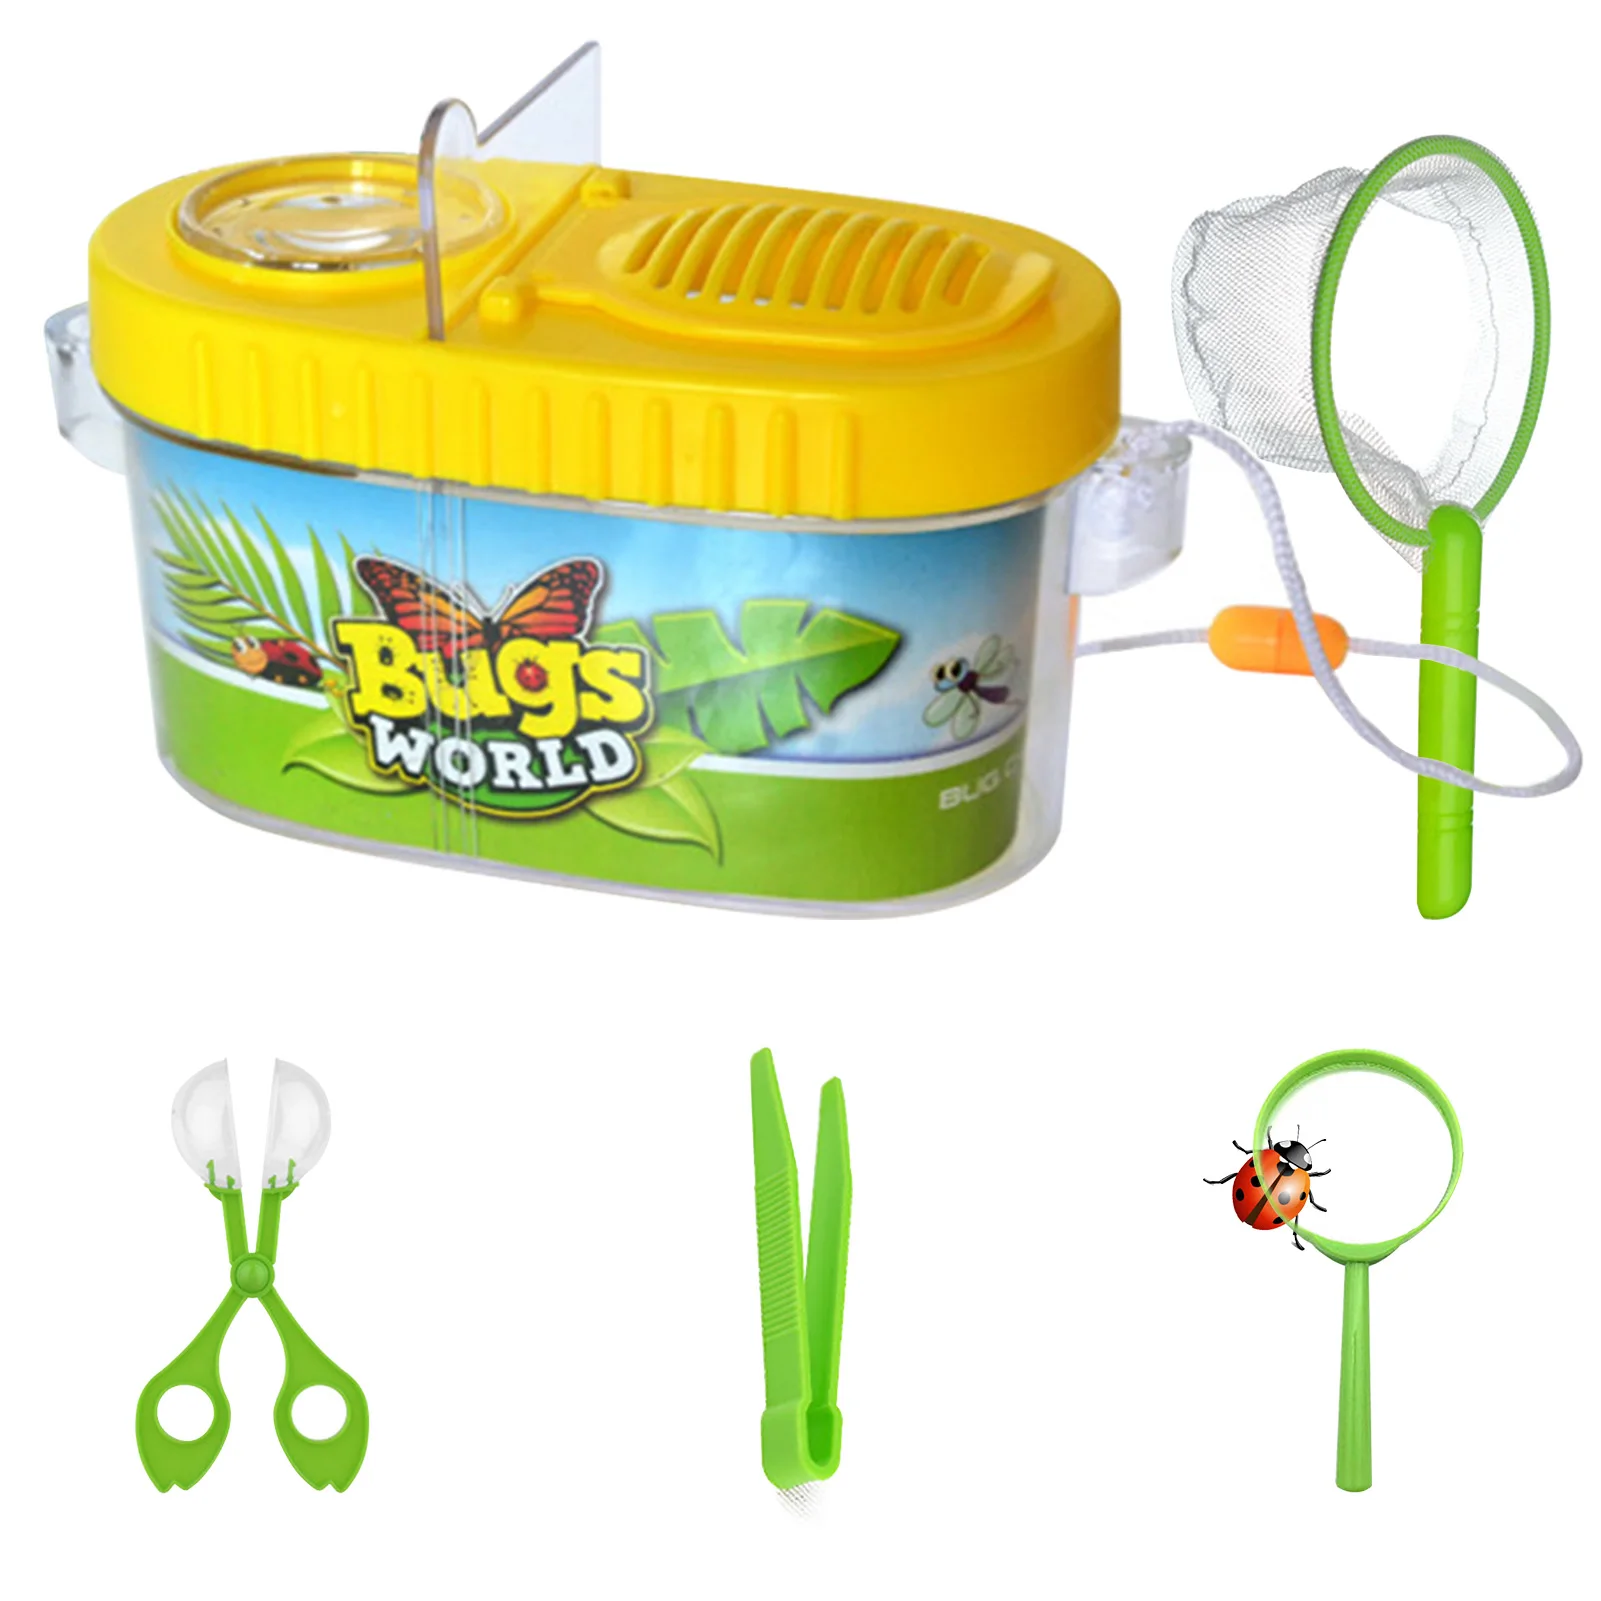 

Insect Catching Toy Set Insect Feeding Observation Box Kit Educational Explorer Toy Contains Magnifying Glass Clip Net Fun